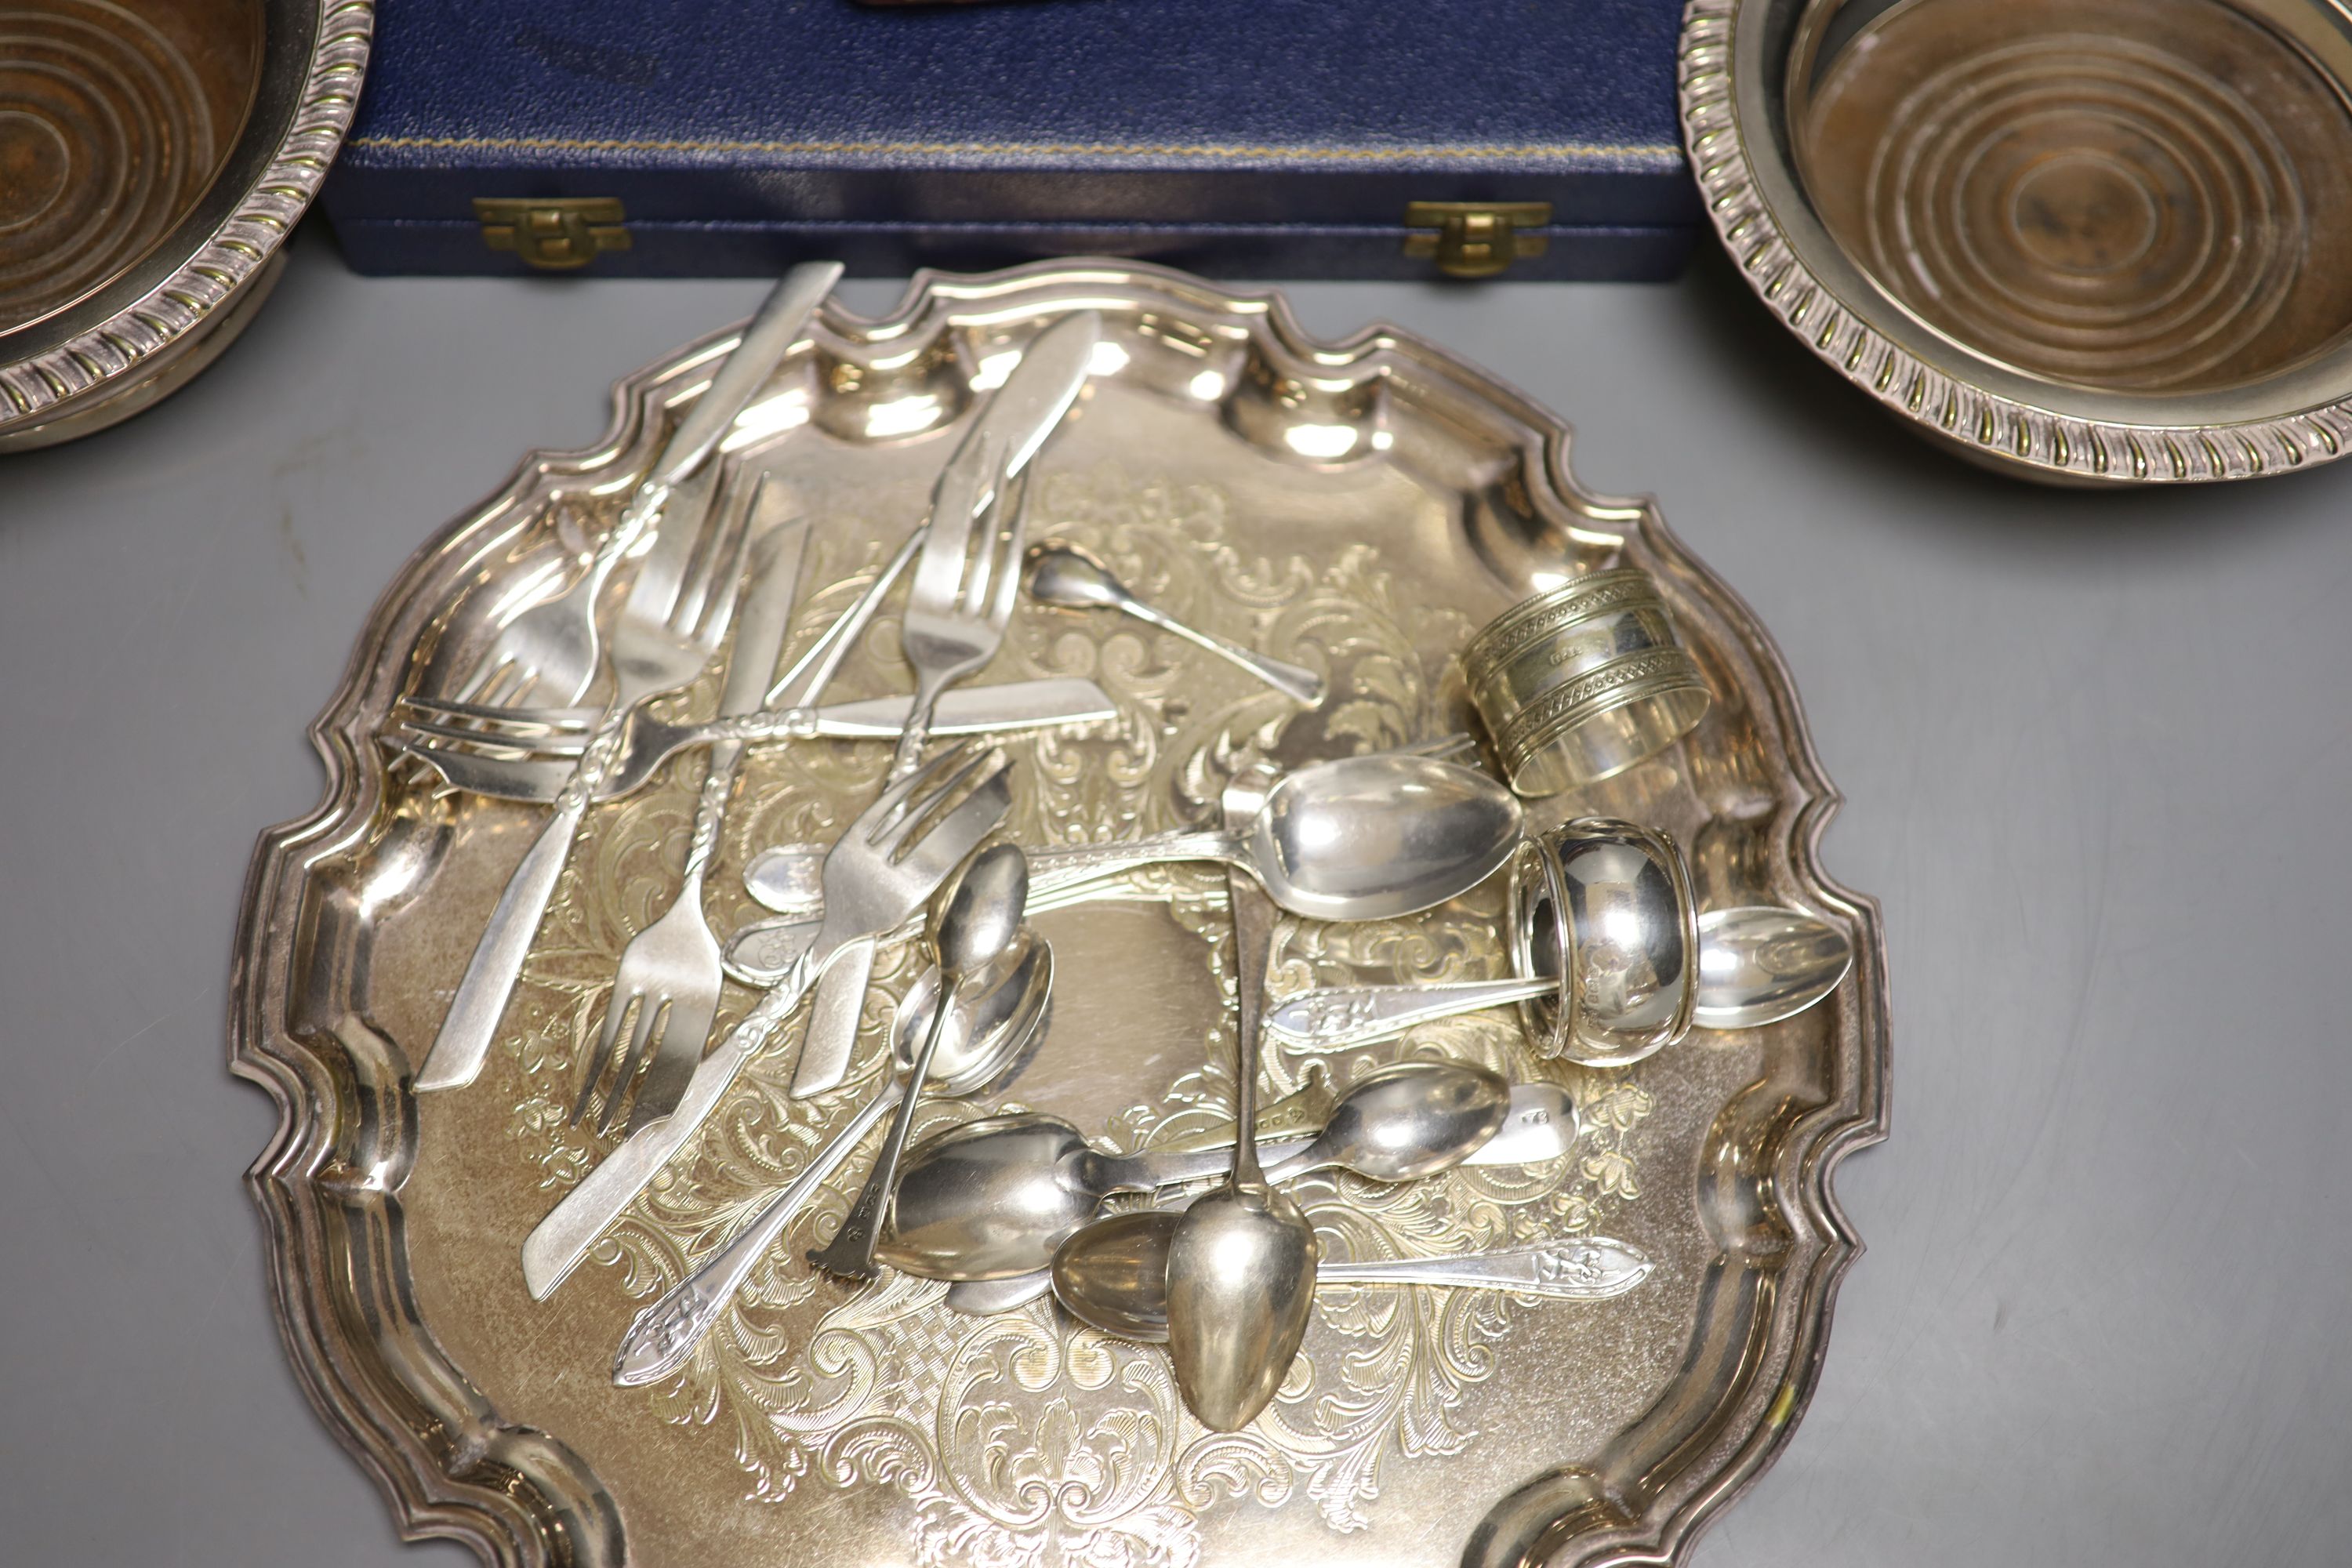 A silver-mounted amber cheroot holder, cased, with Russian inscription, Birmingham 1896 and sundry silver and plated flatware,